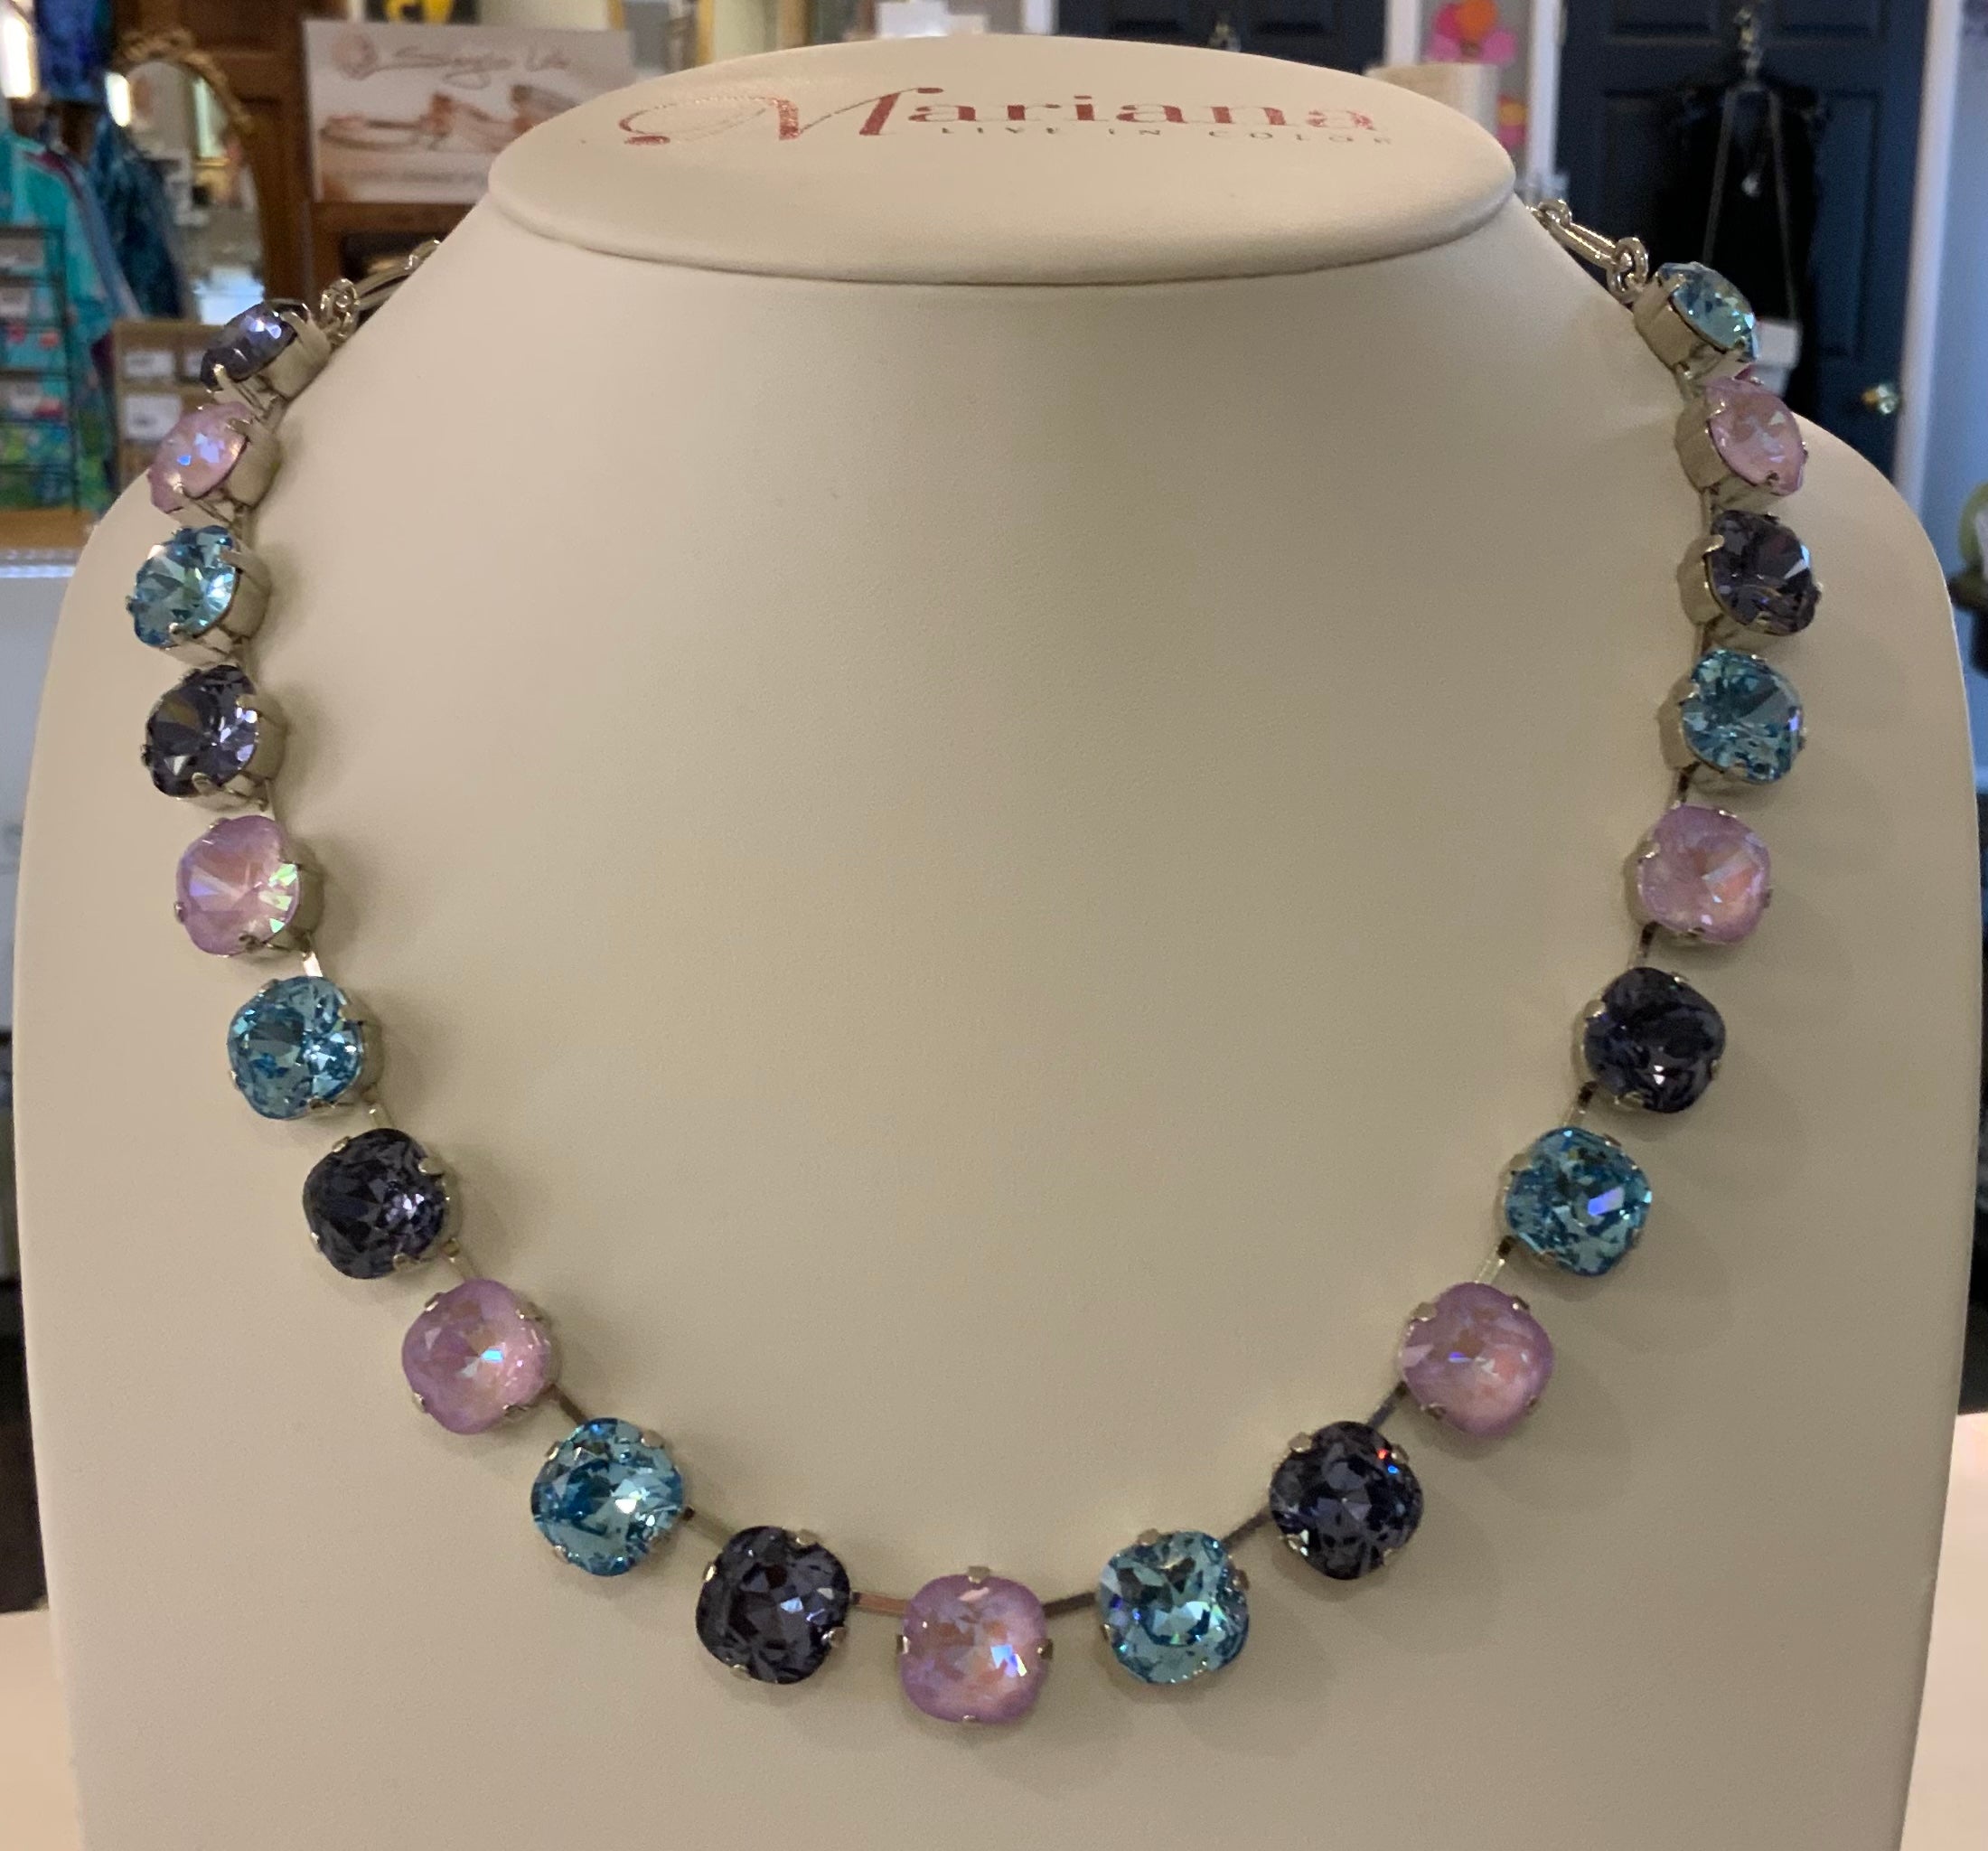 Mariana Rhodium Plated Lovable Cushion Cut Crystal Necklace in "Blue Moon”